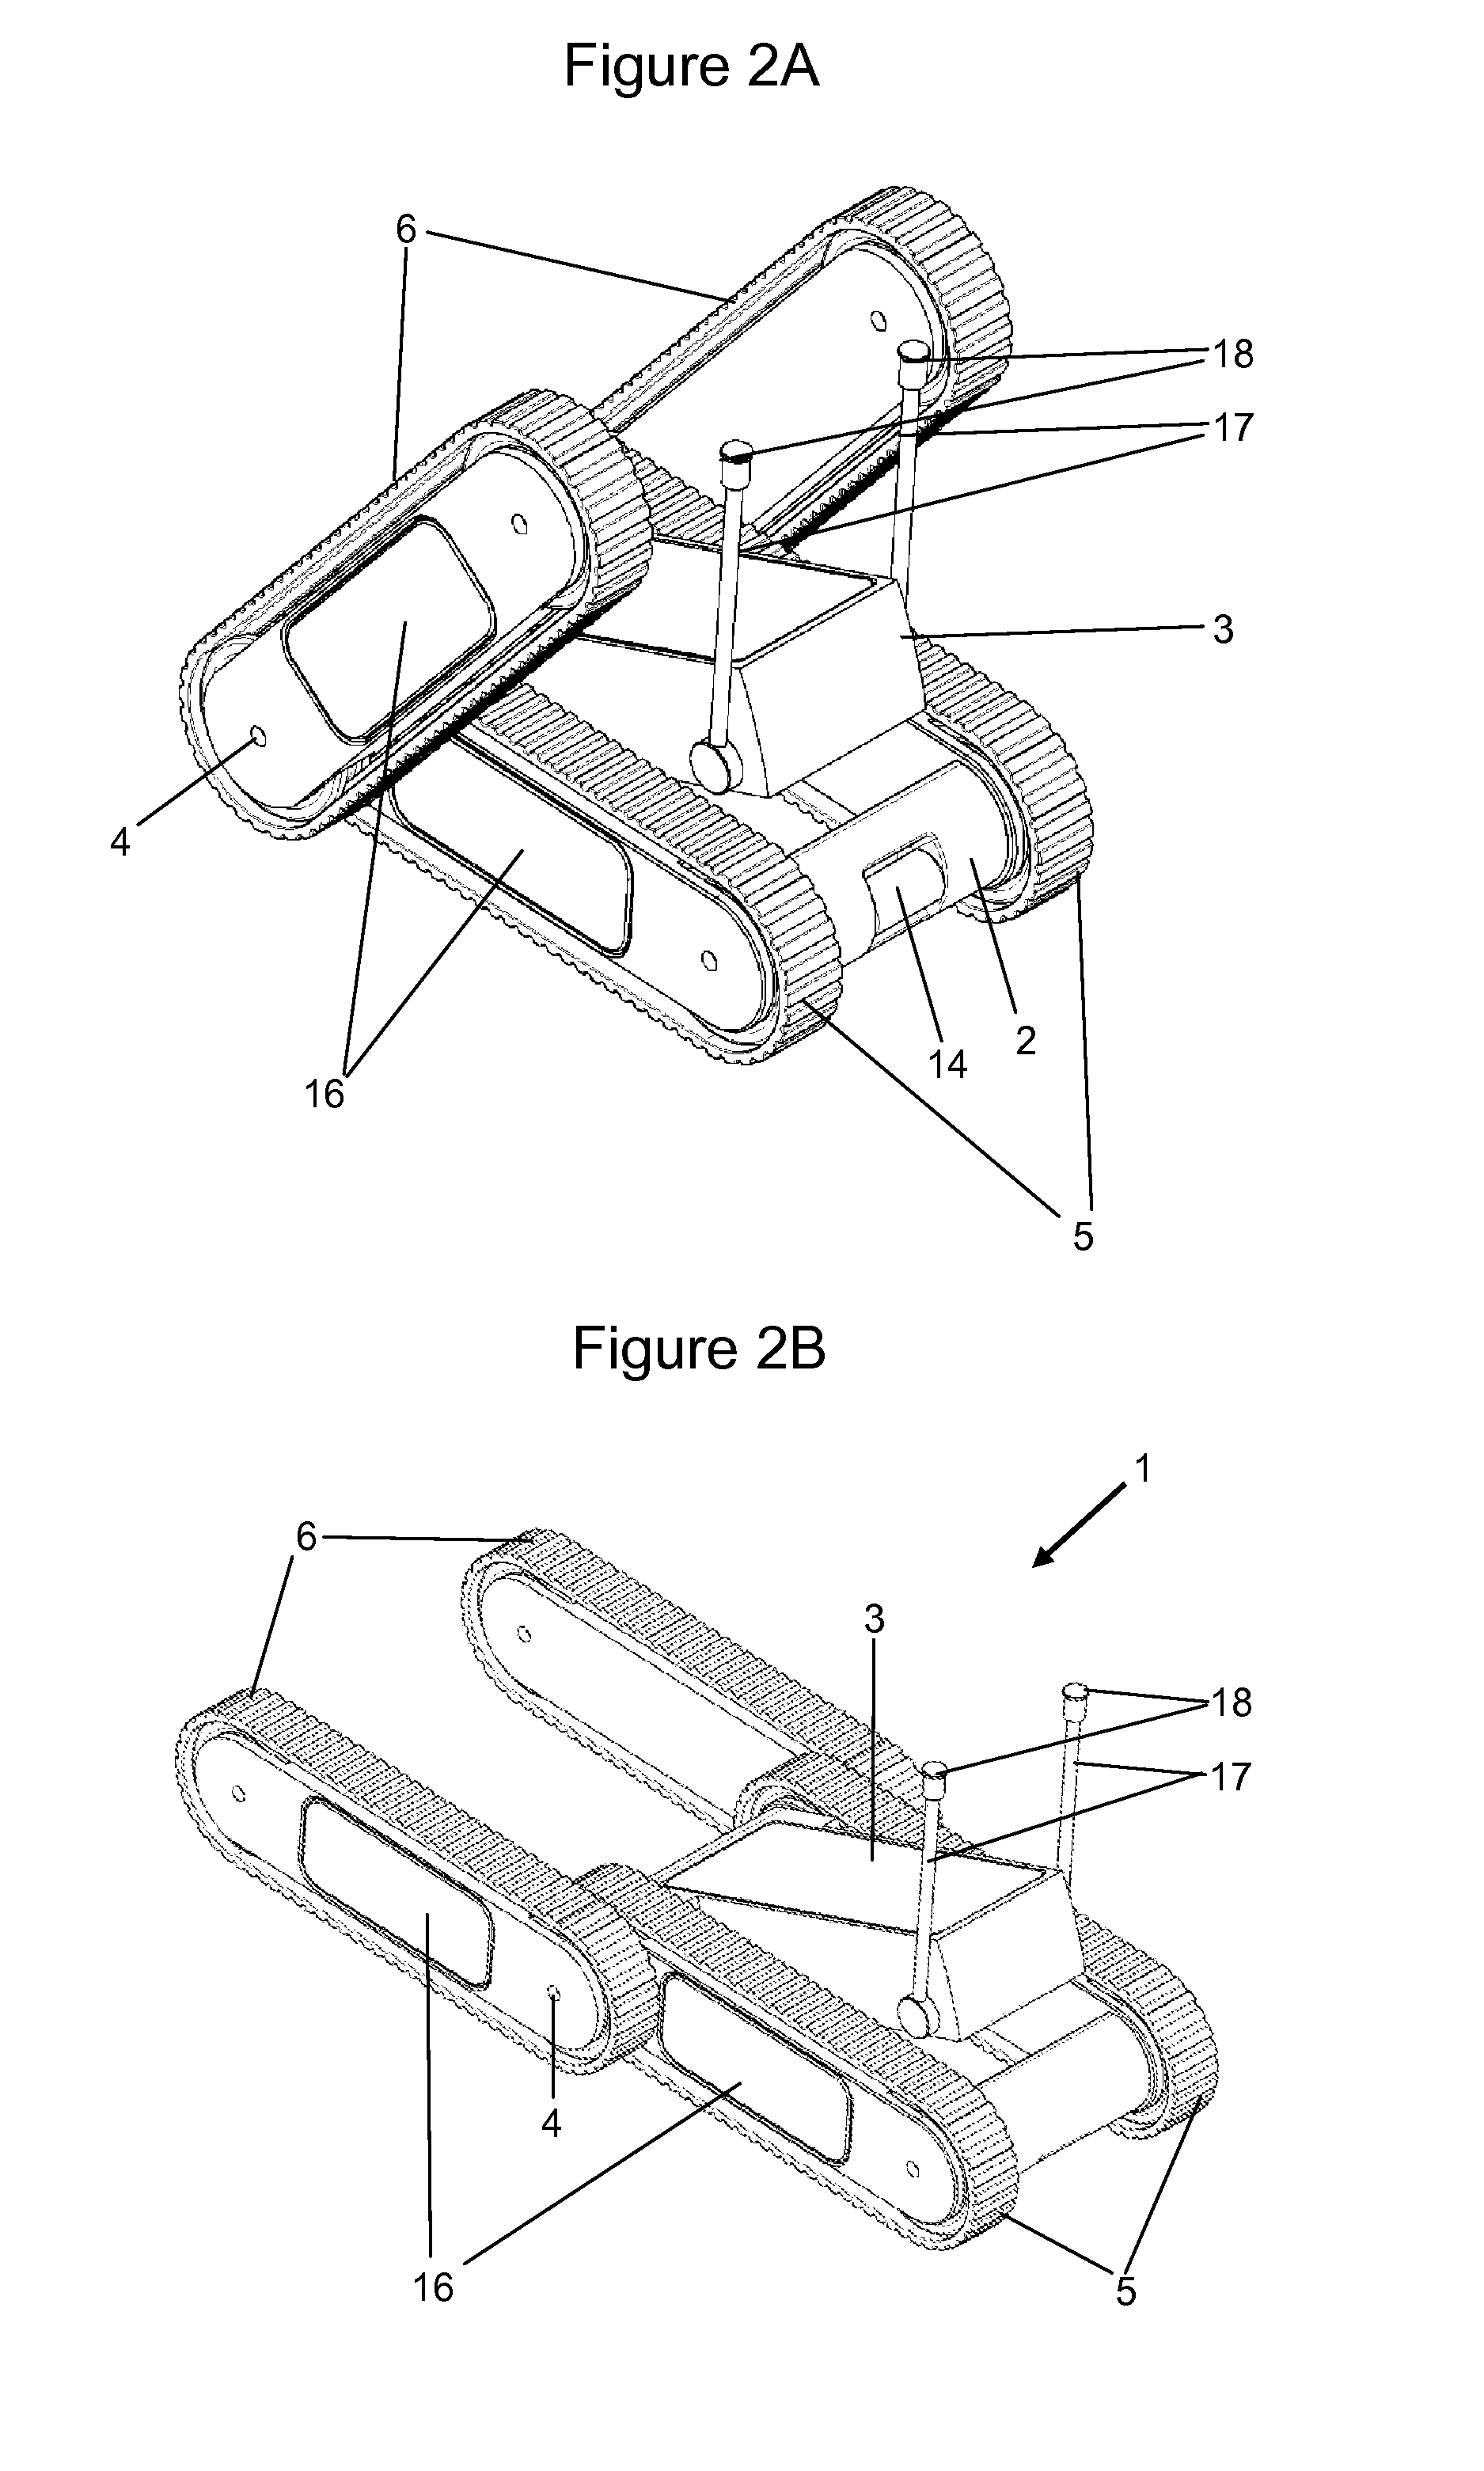 Transformable Robotic Platform and Methods for Overcoming Obstacles